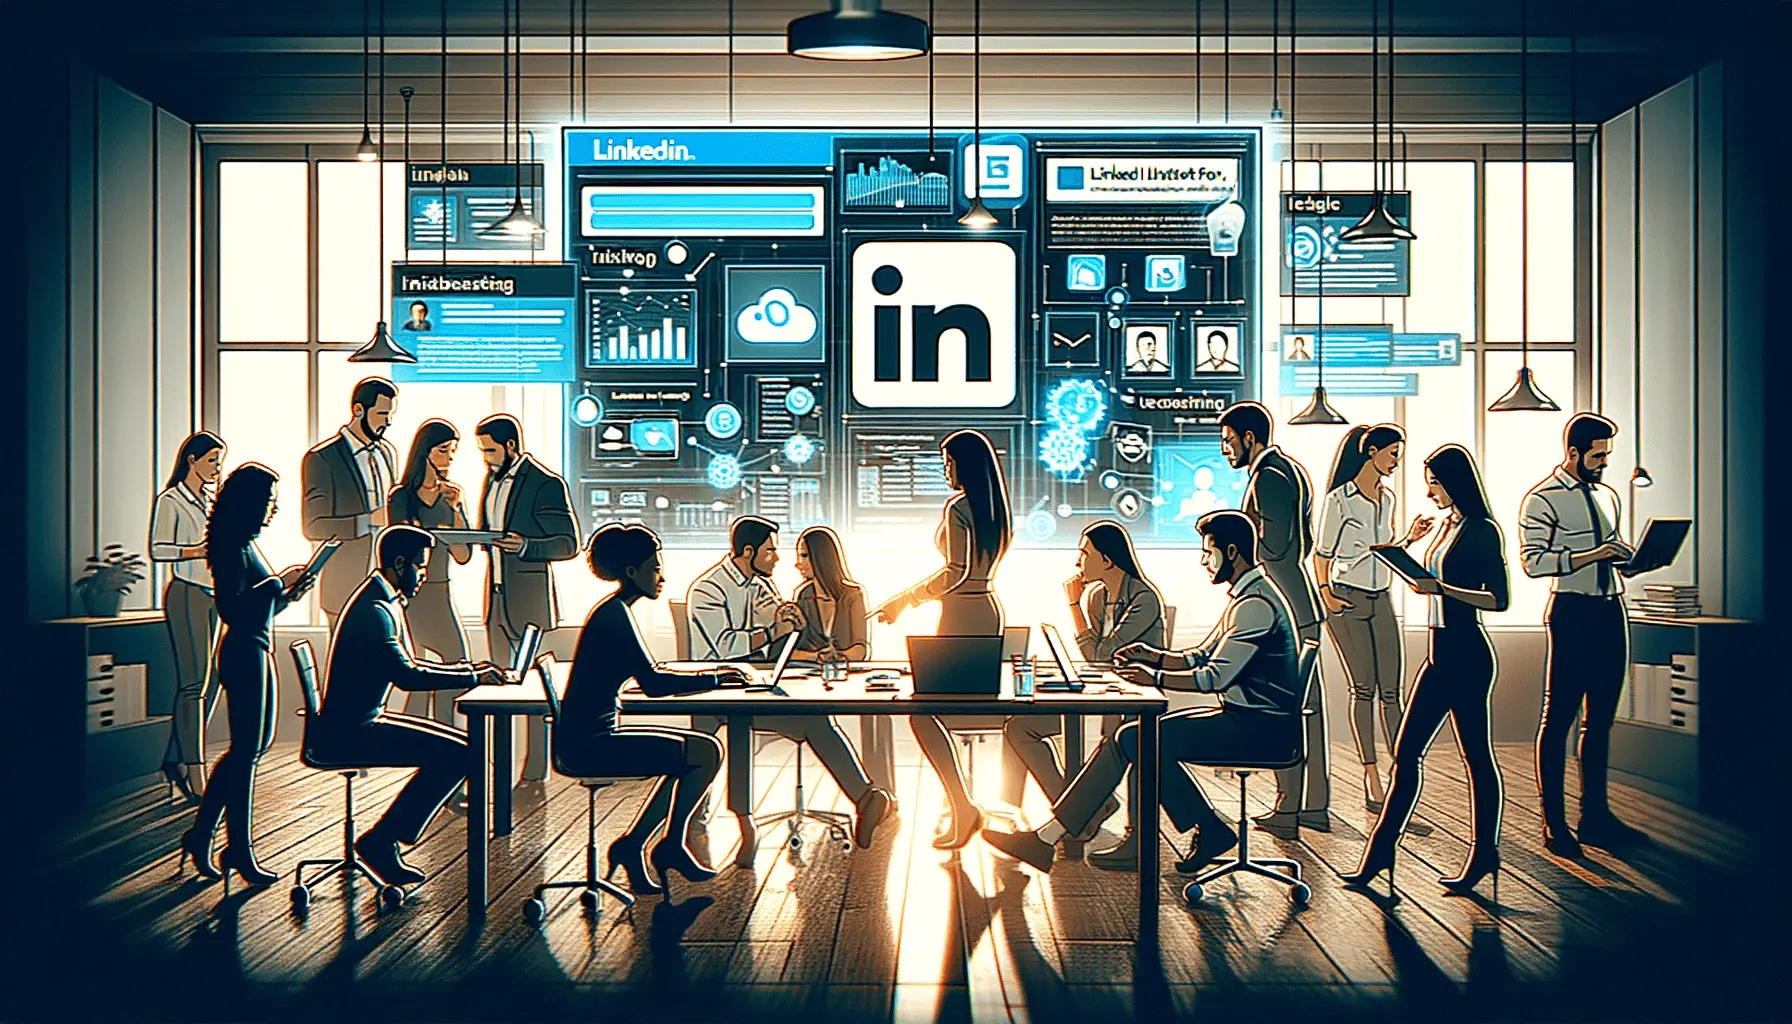 Strategy 4: Create Engaging and Valuable Content (Linkedin)